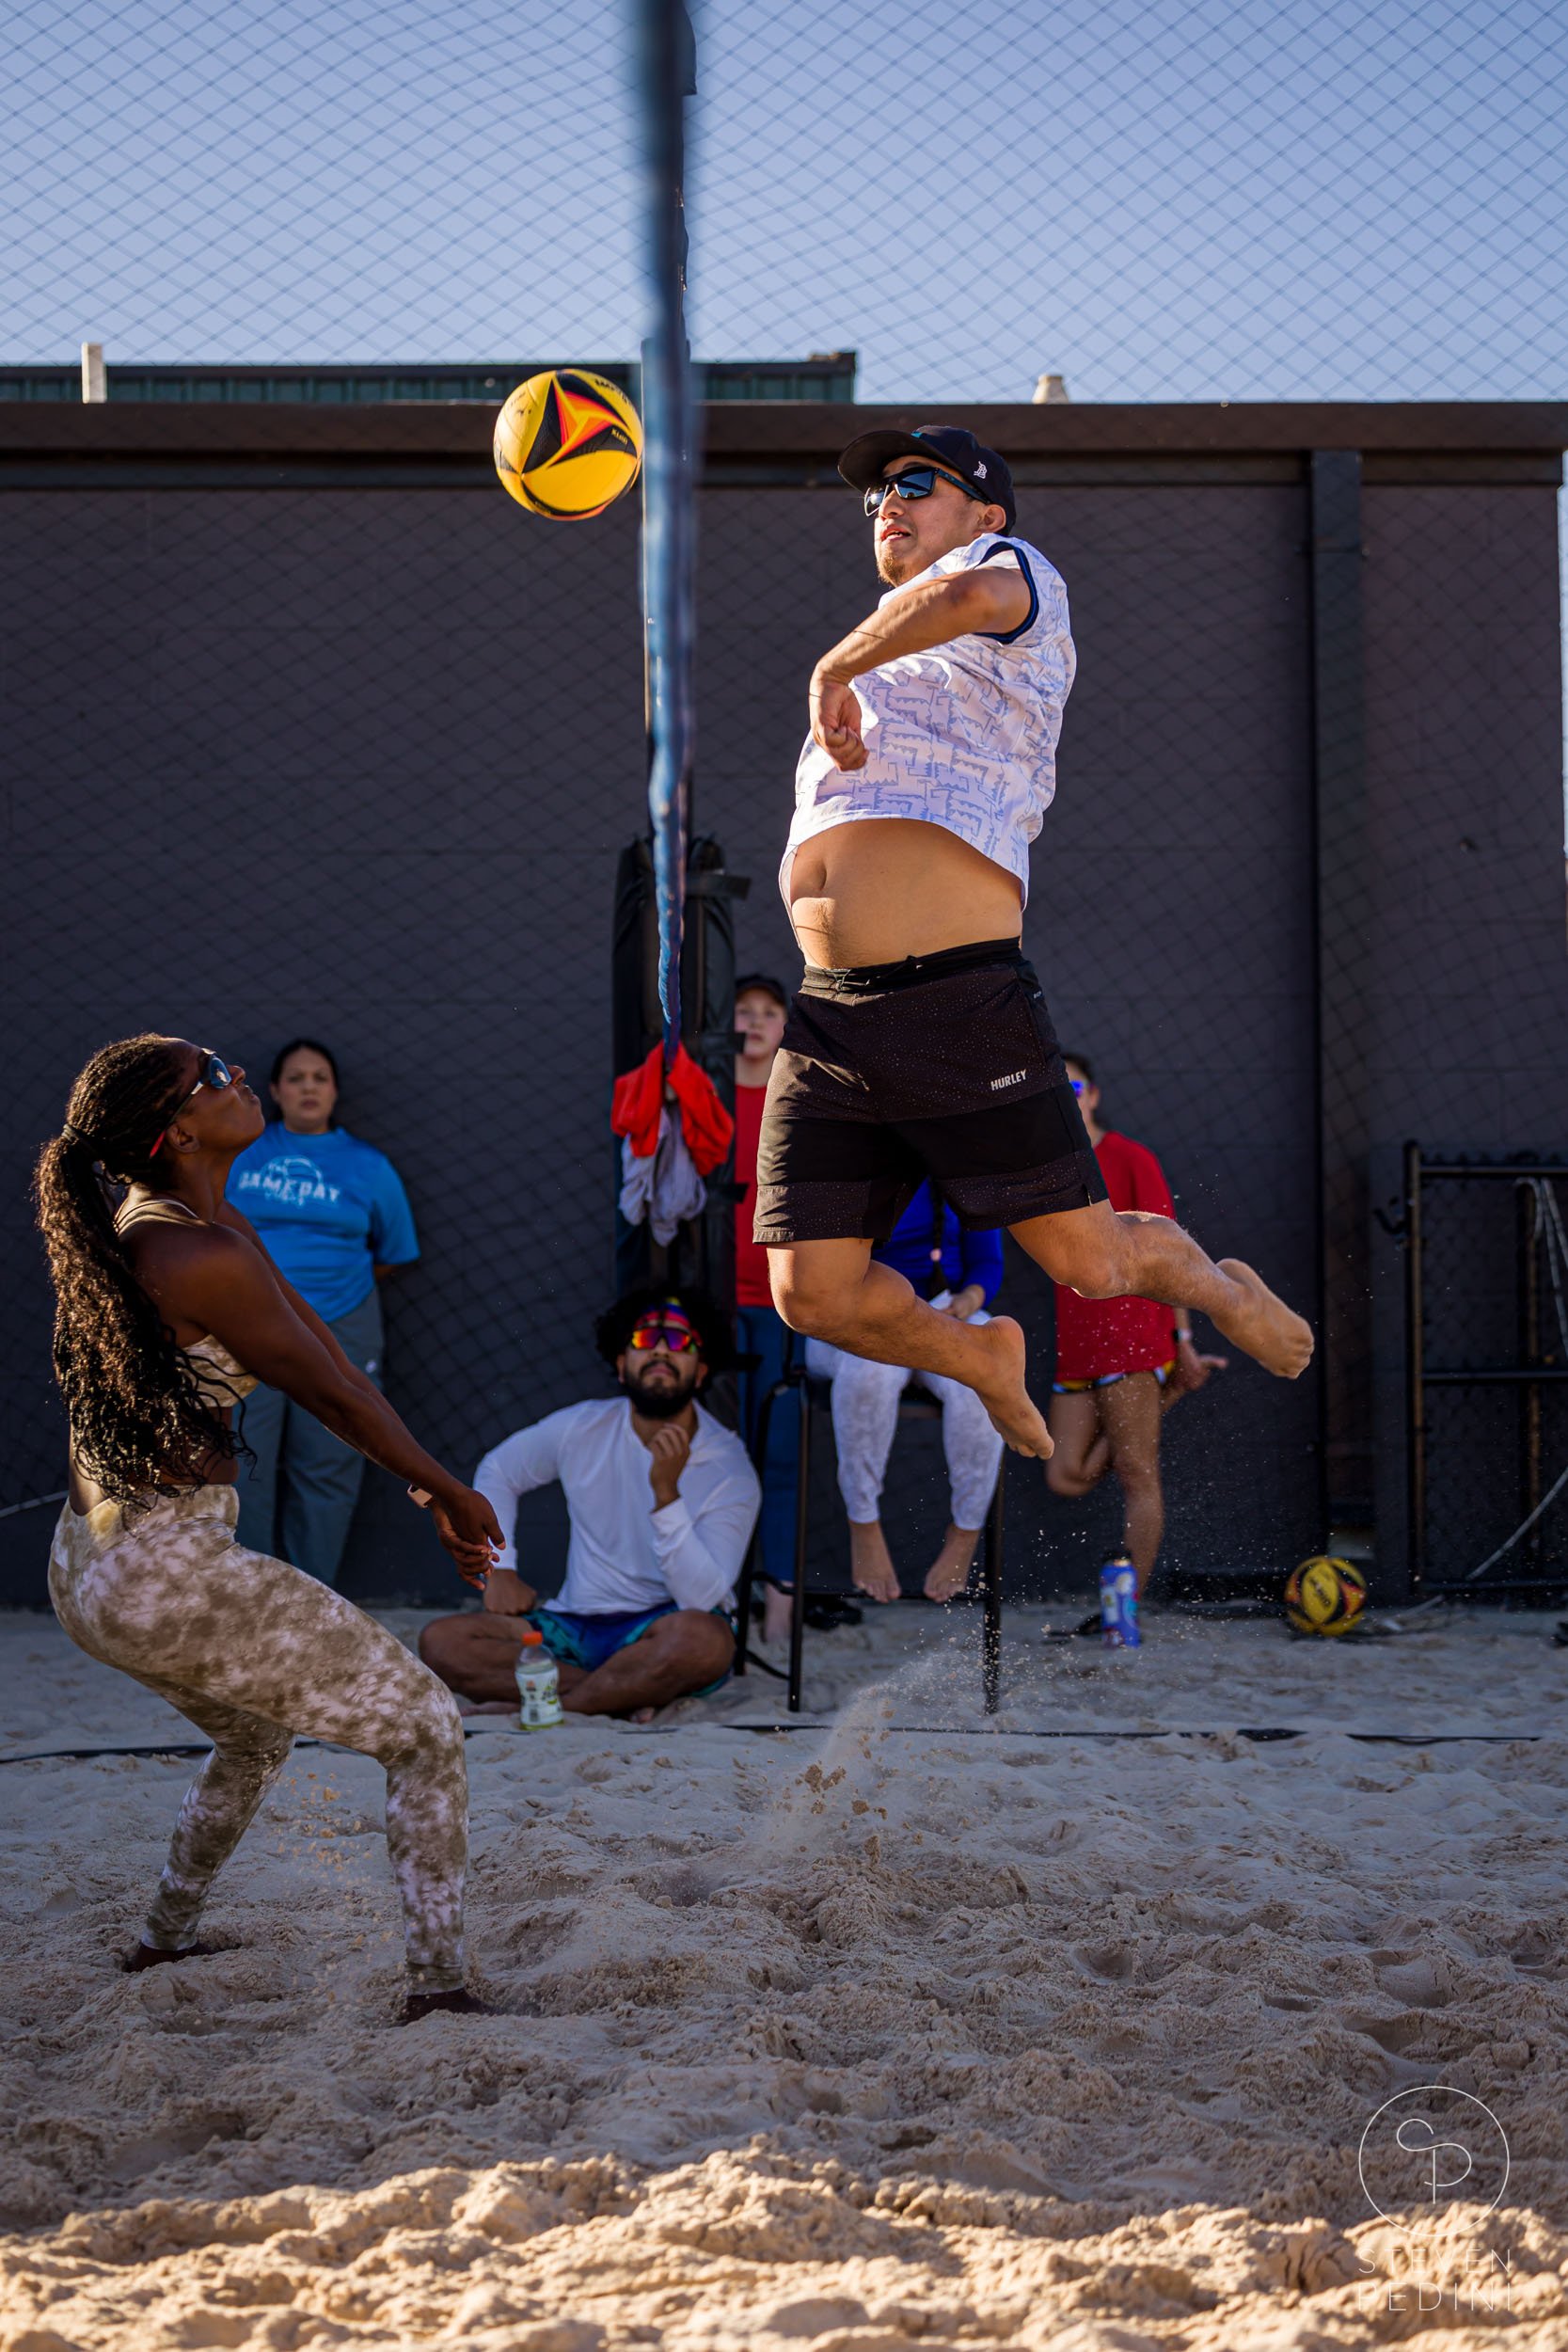 Steven Pedini Photography - Bumpy Pickle - Sand Volleyball - Houston TX - World Cup of Volleyball - 00078.jpg